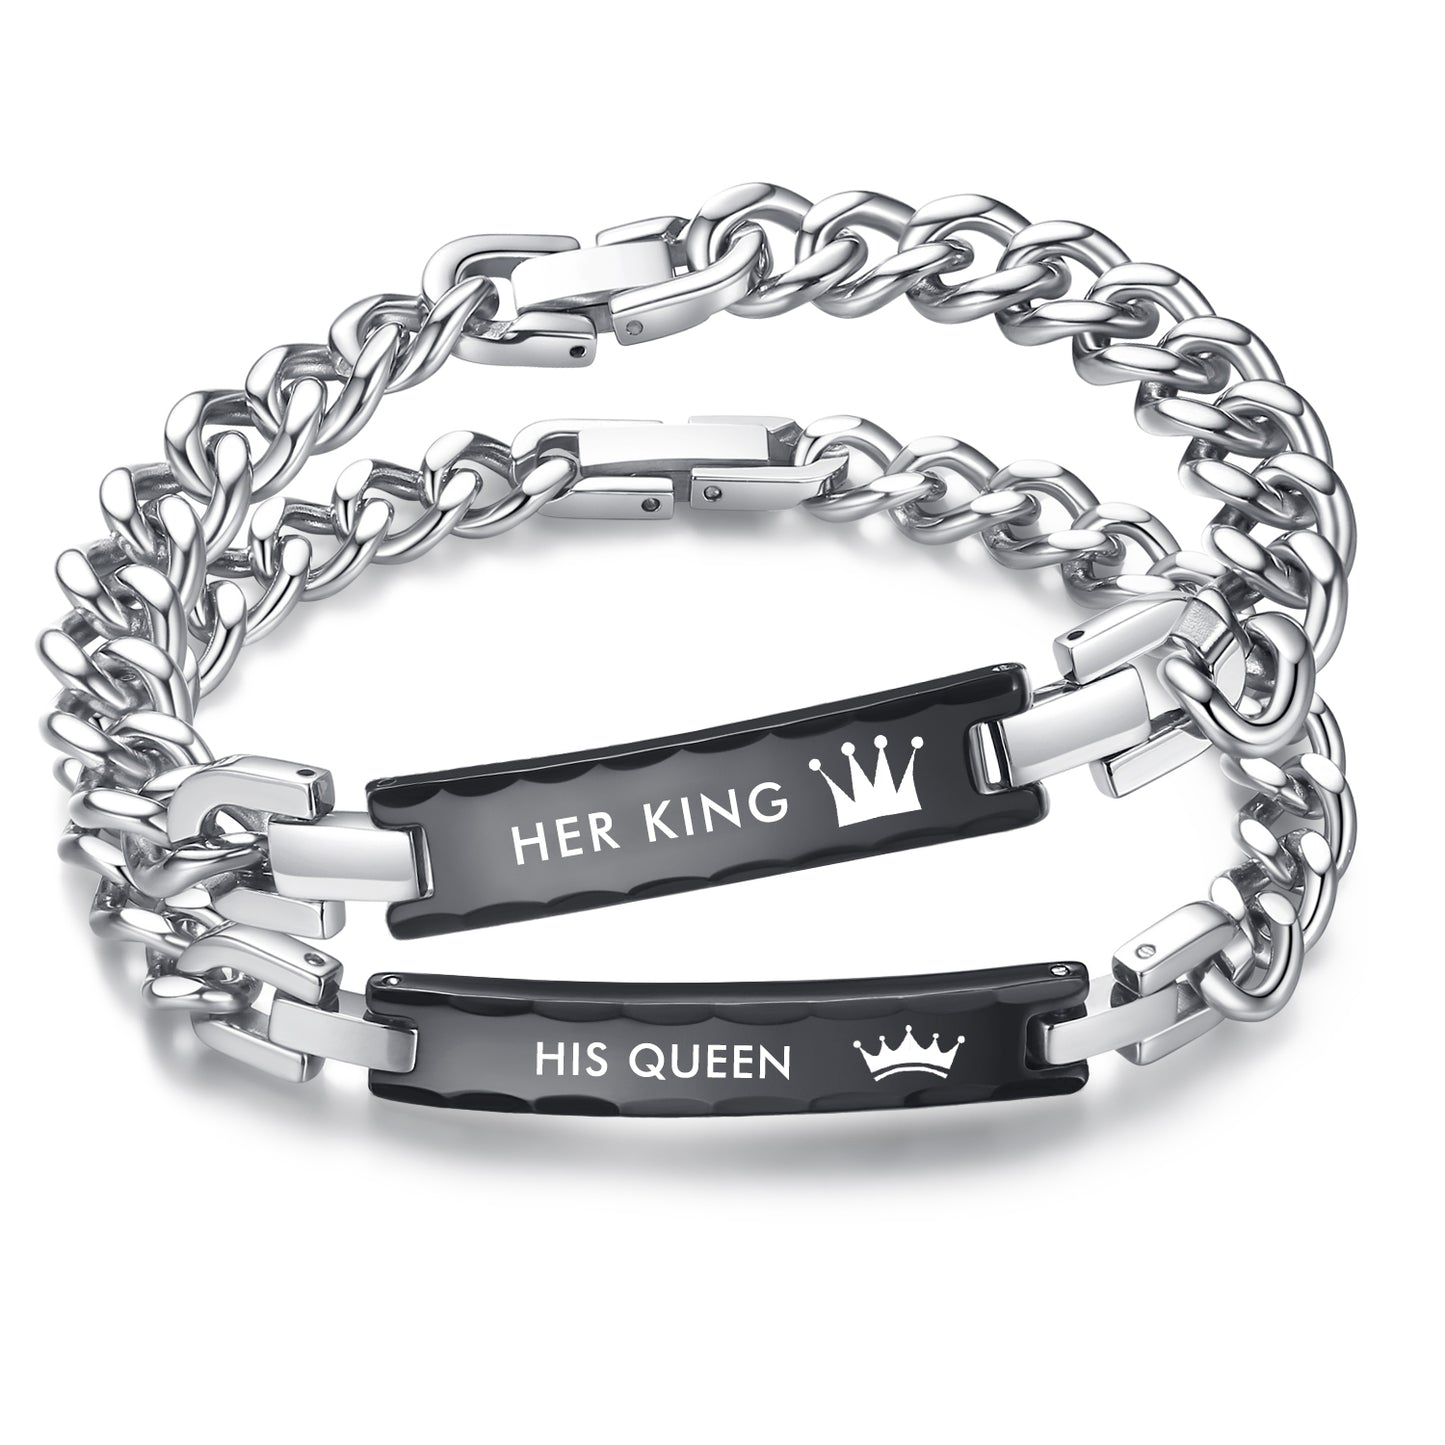 His Queen Her King Bracelets Black Stainless Steel ID for Matching Relationship Bracelets for Couples